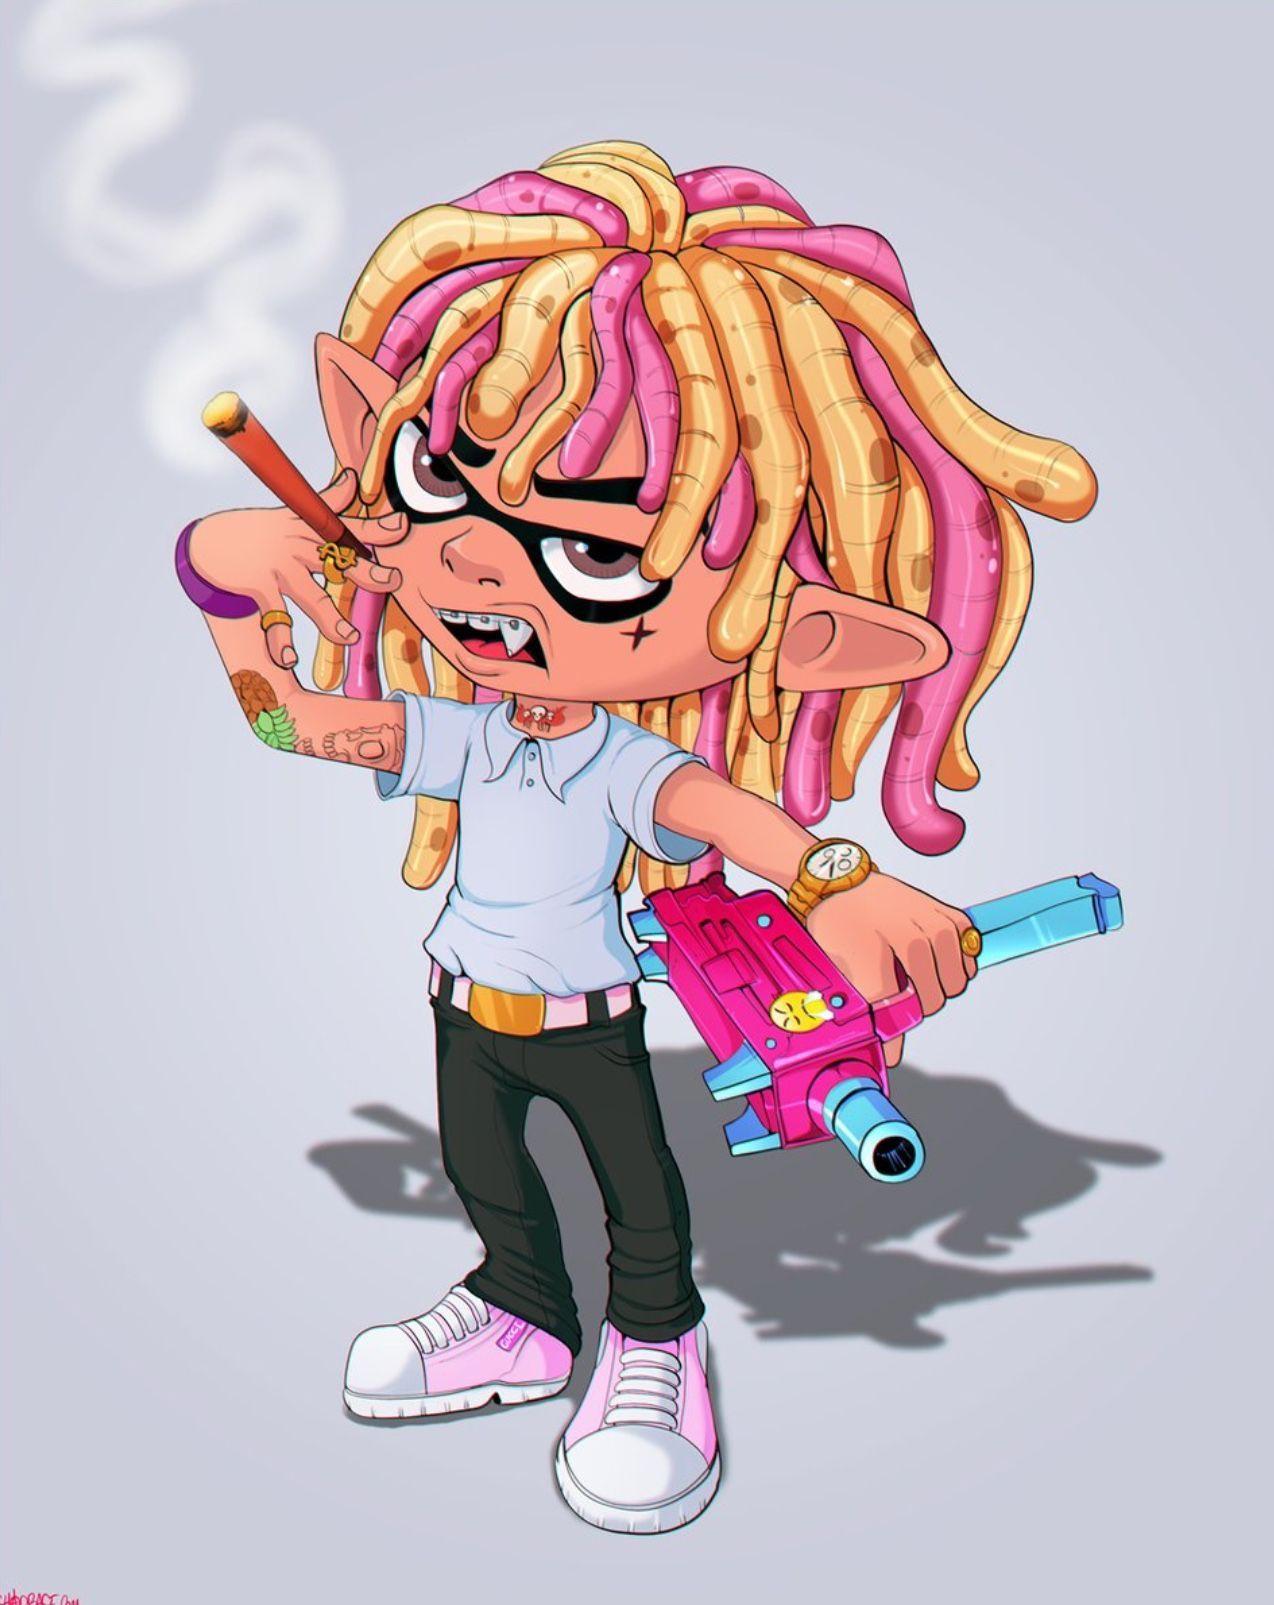 Lil Pump Anime Wallpapers - Wallpaper Cave